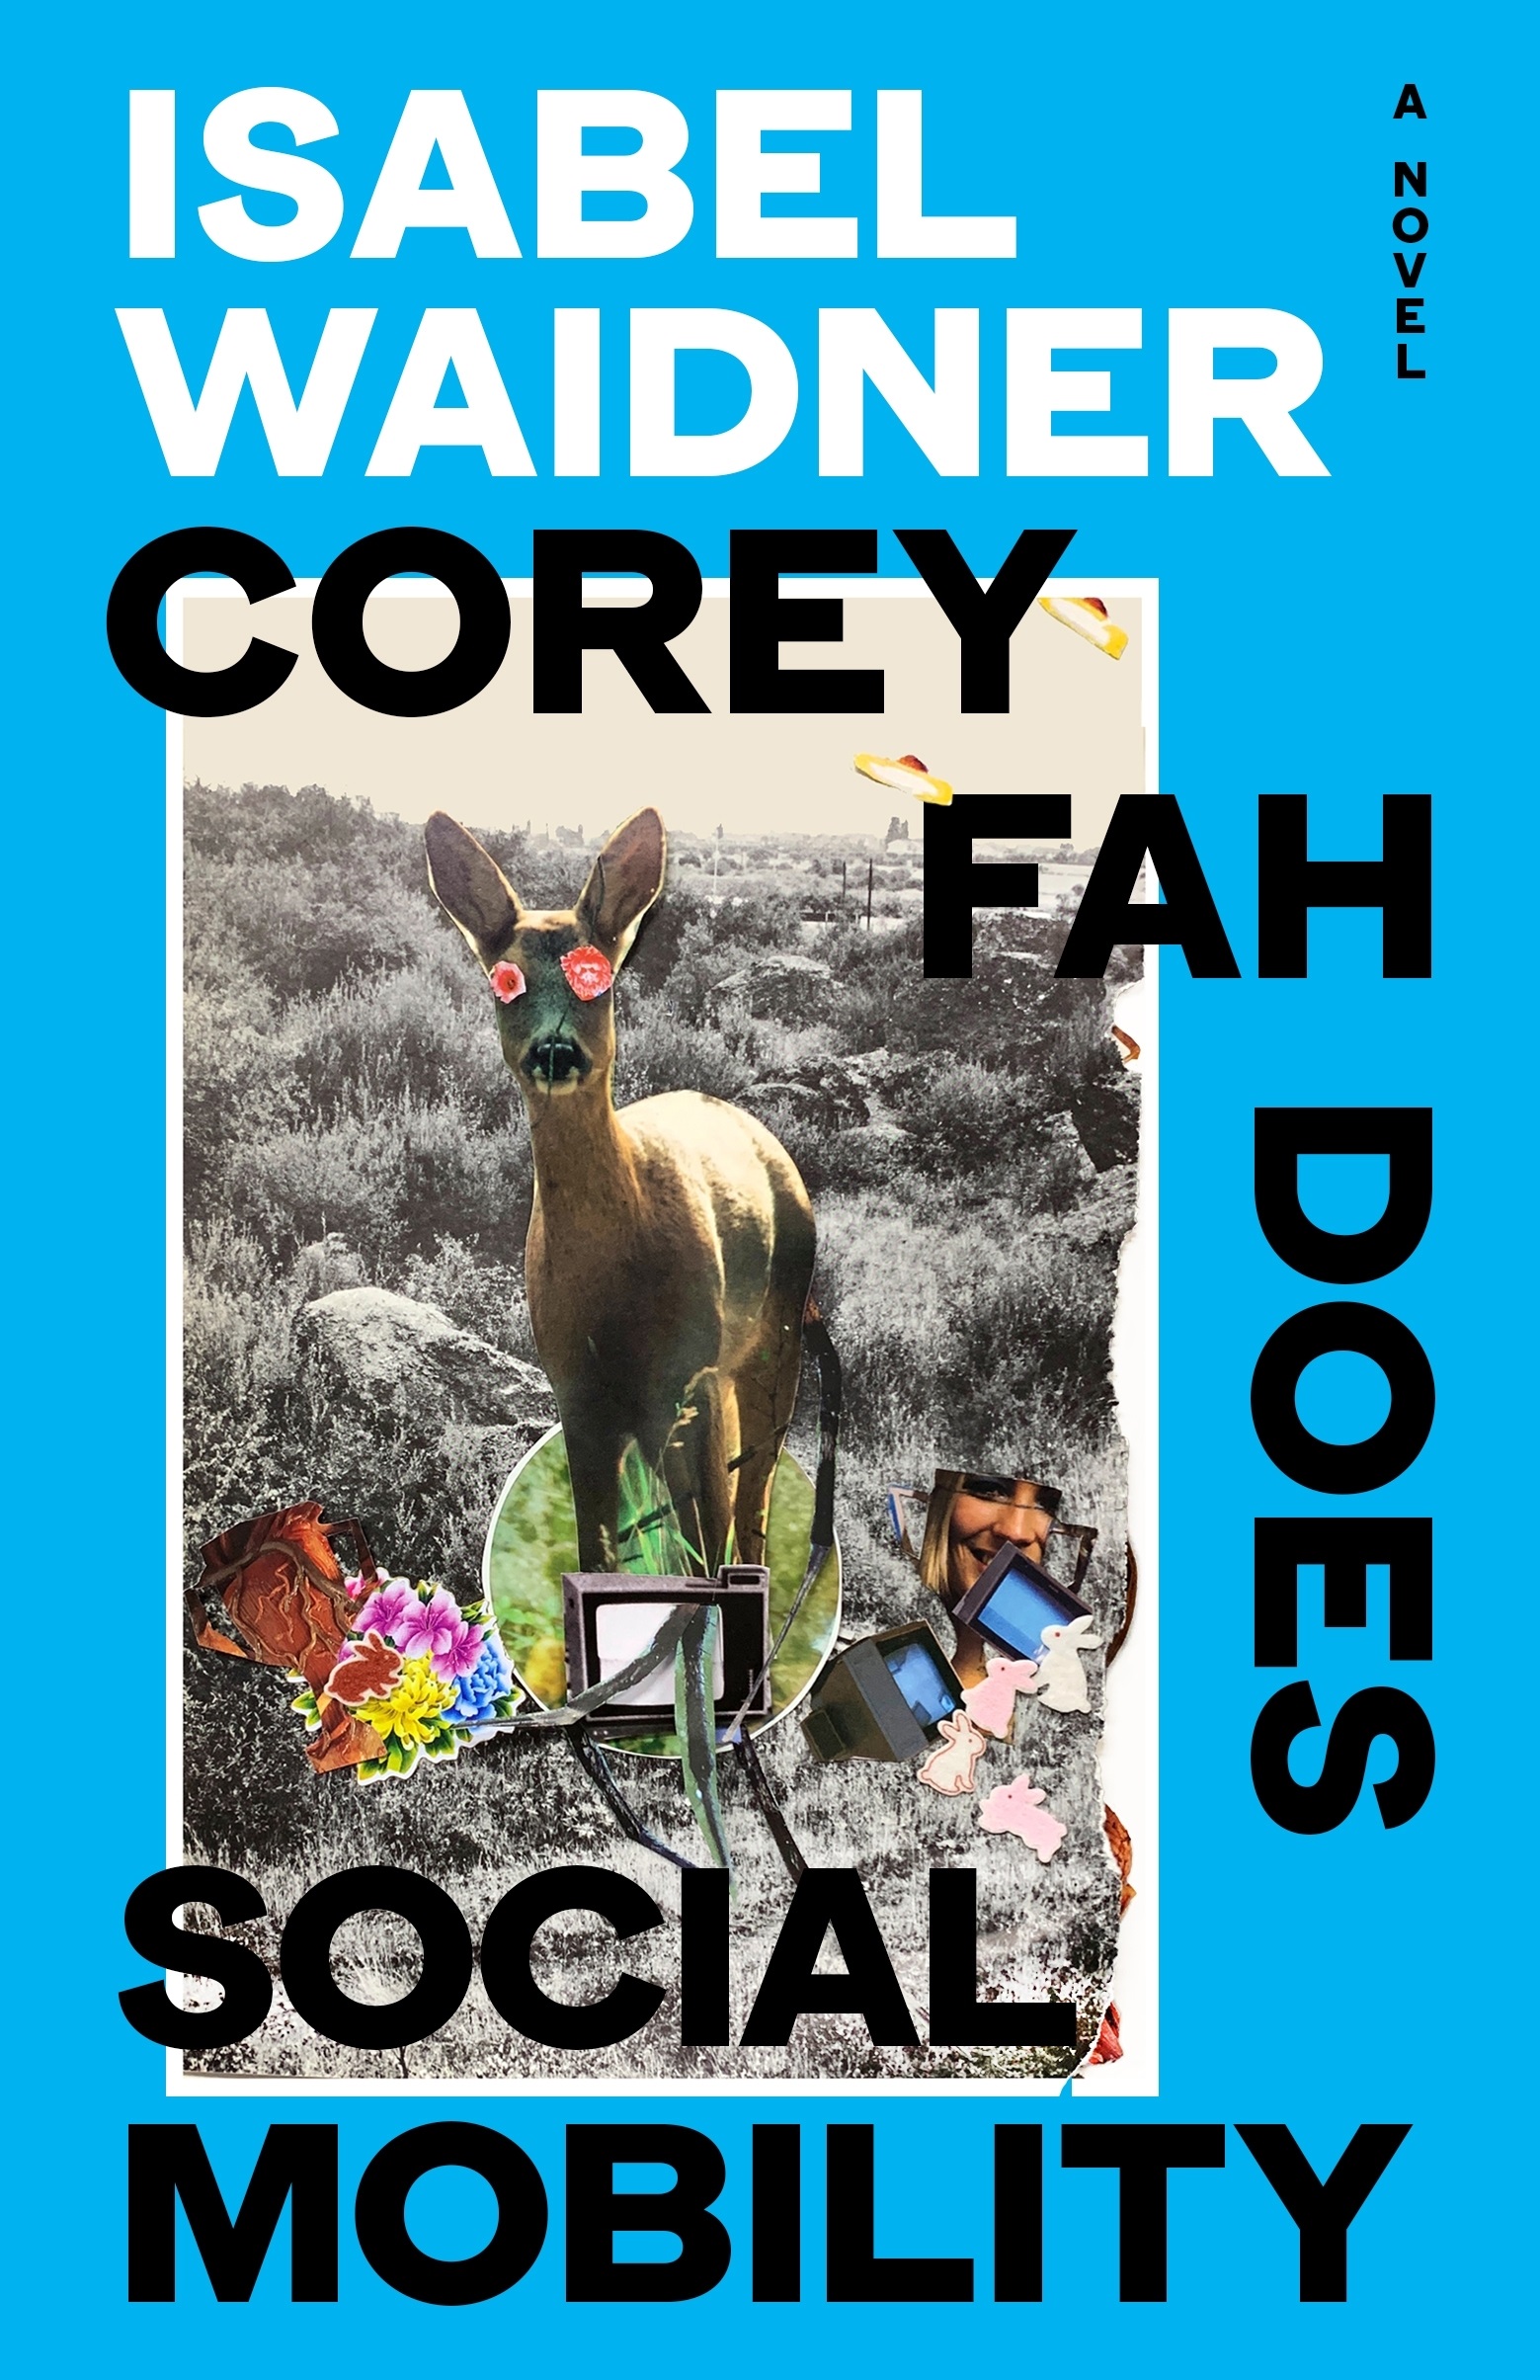 A book cover showing a digitally altered black and white photo of a deer set against a blue background